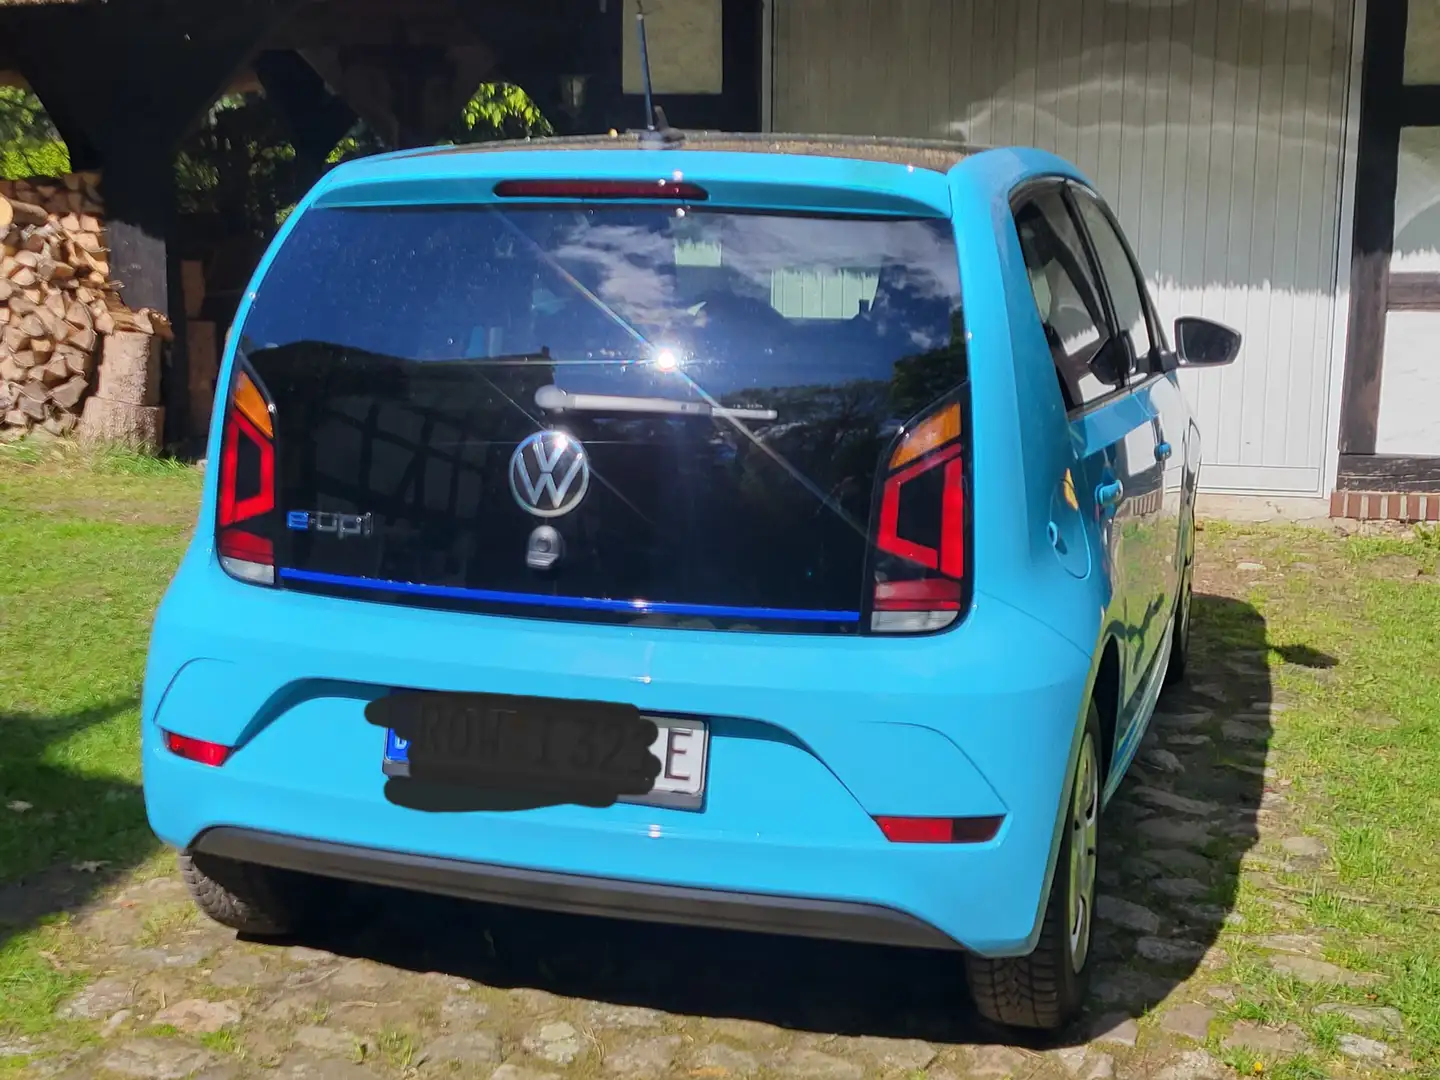 Volkswagen e-up! up! e-load up! Azul - 2